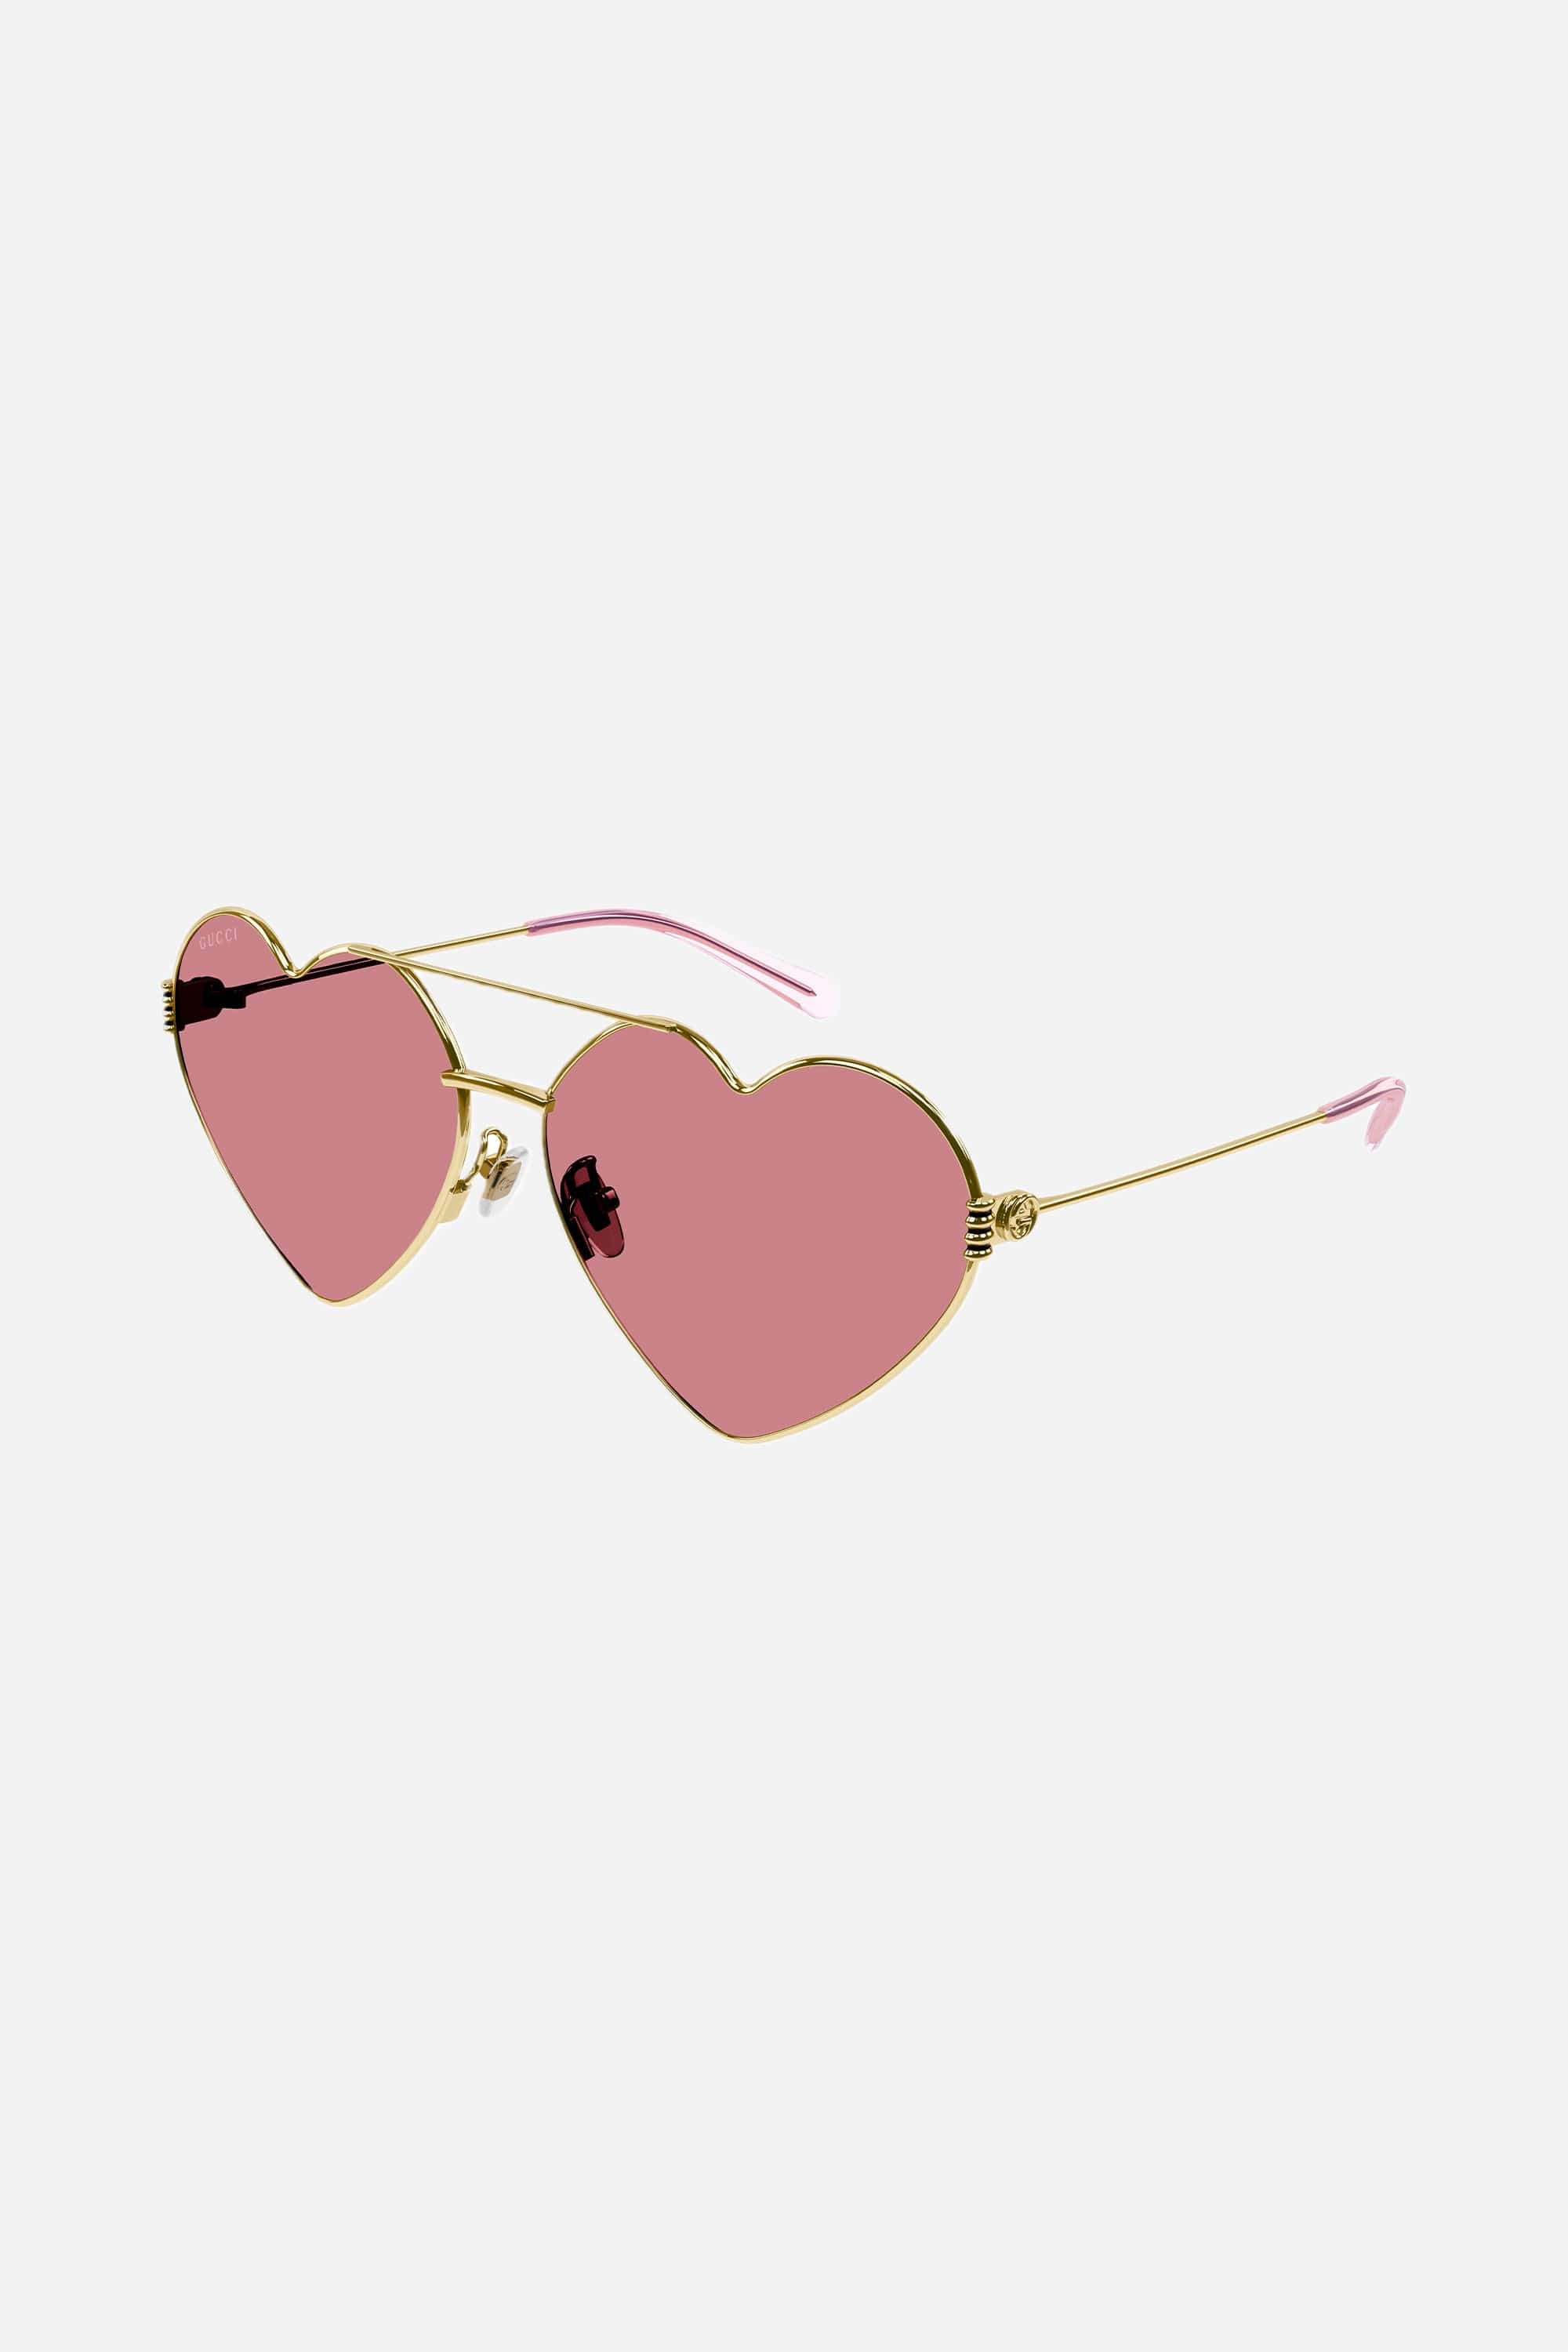 Gucci GG1283s metal heart shape sunglasses with pink lenses - Eyewear Club